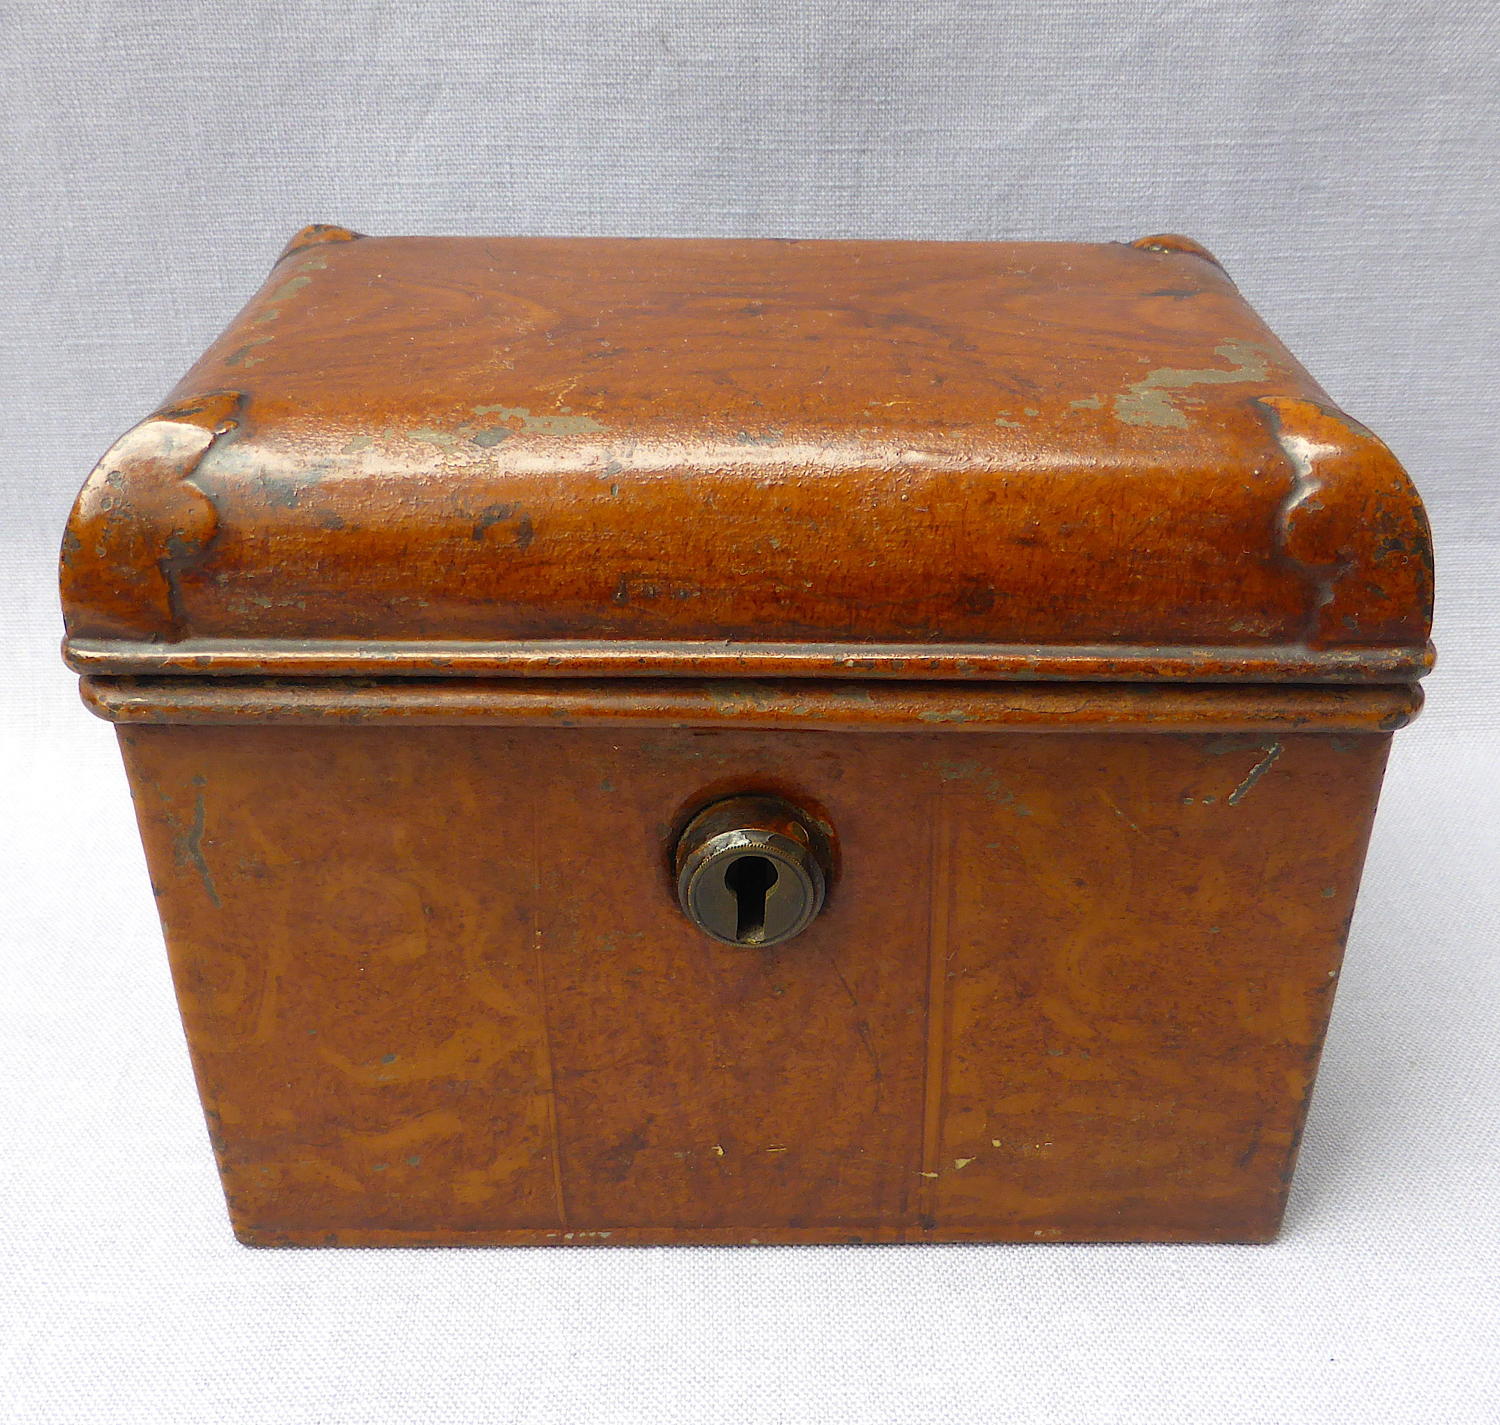 Doll's miniature tin trunk with wood grain finish